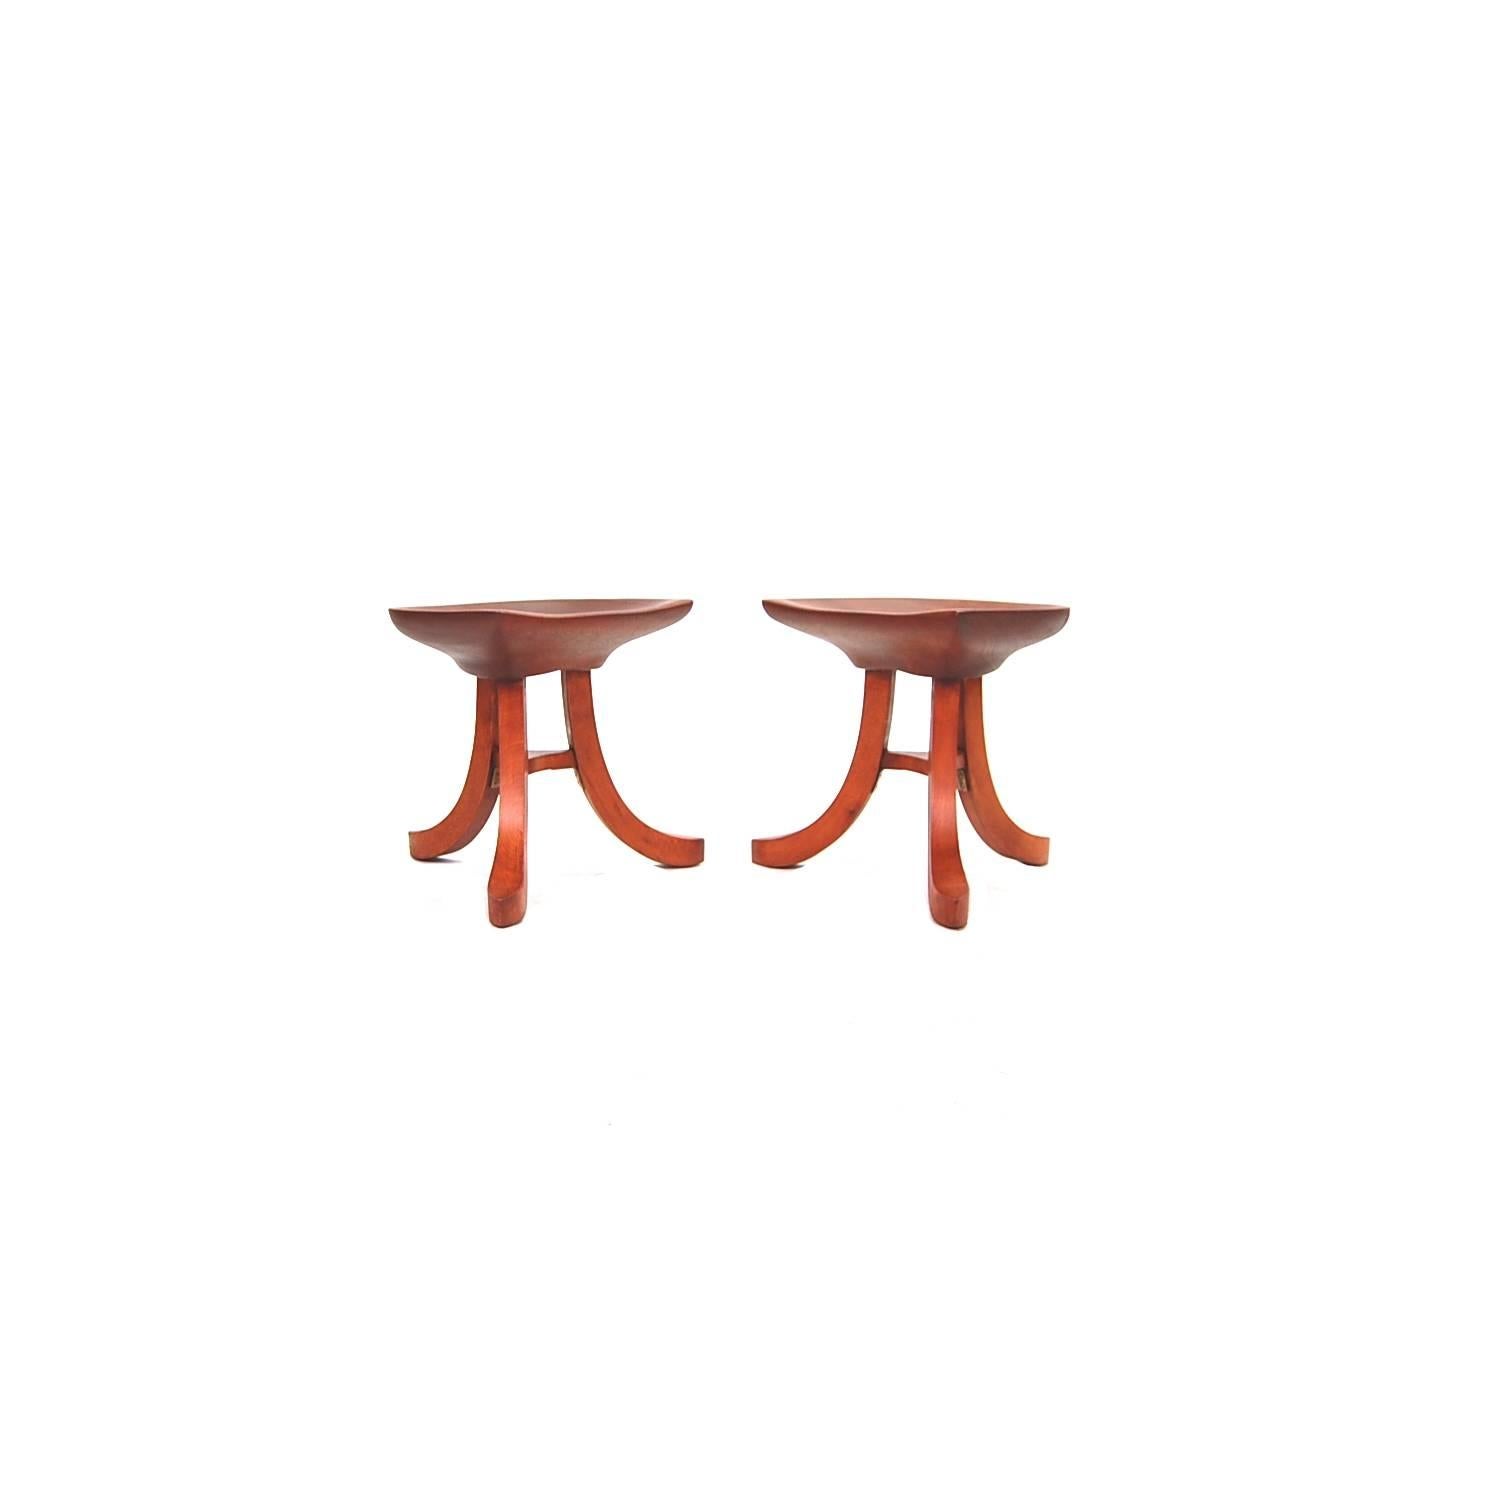 Modern Pair of Stools after Austrian Architect Adolf Loos